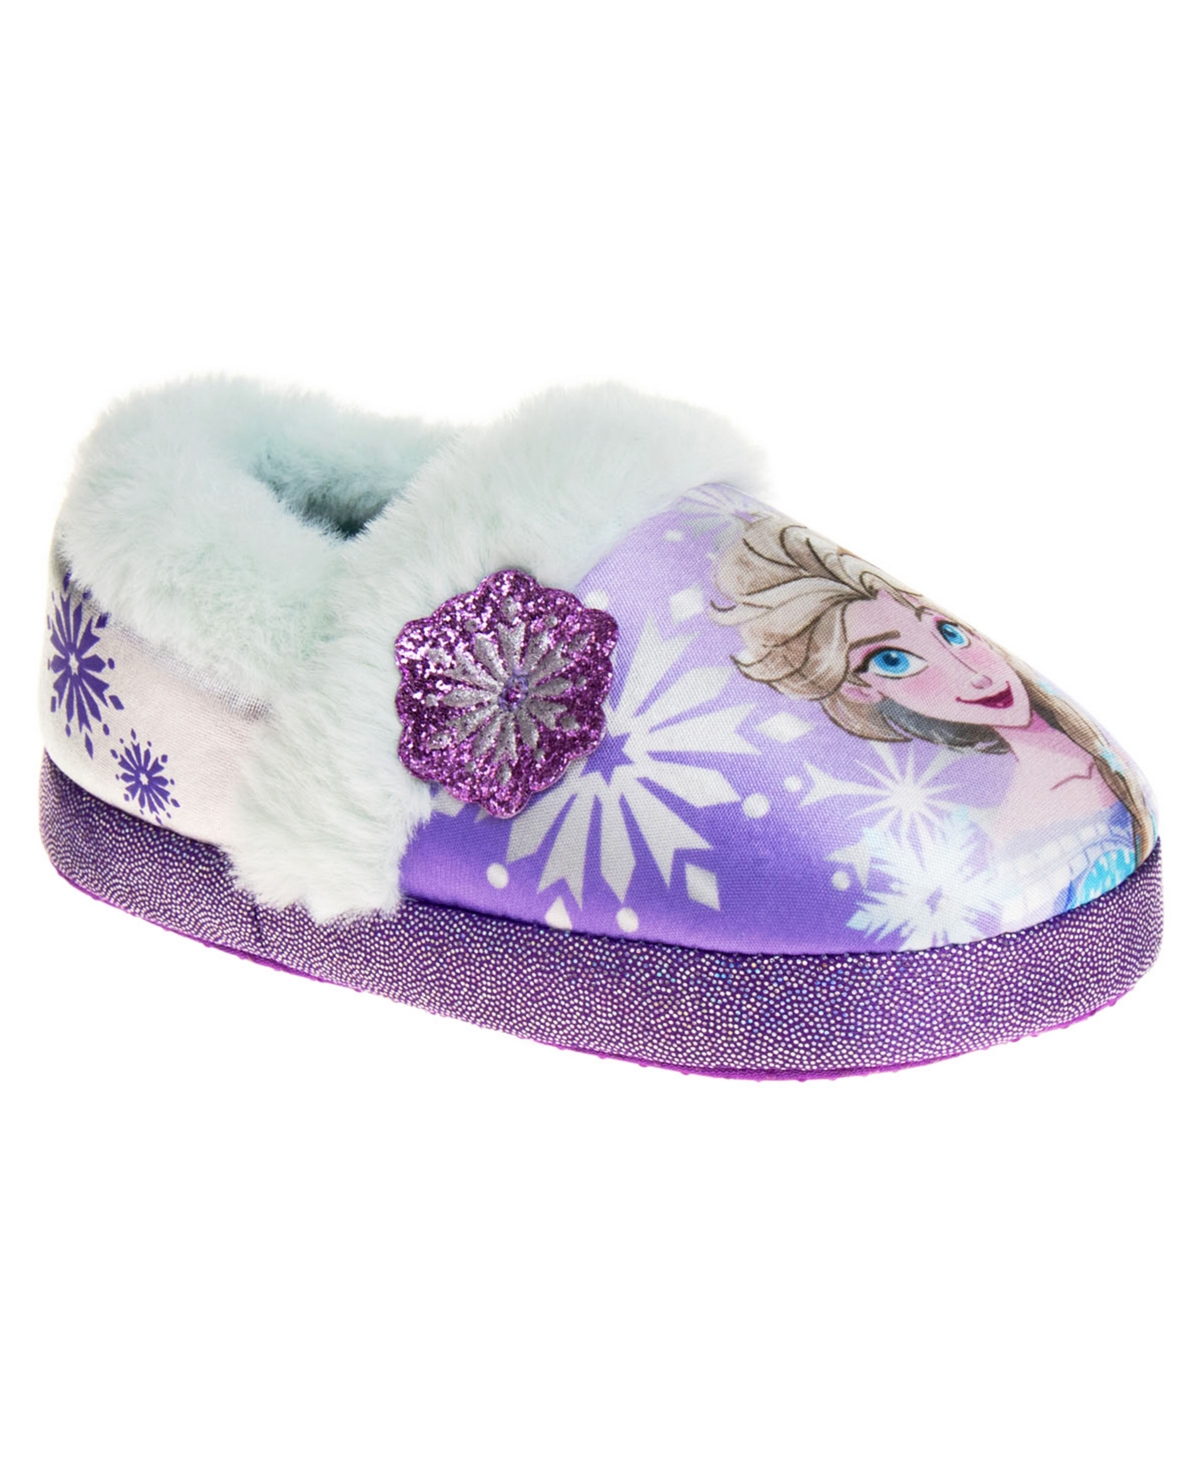 Disney Kids' Toddler Girls Frozen Anna And Elsa Happy Sisters Dual Sizes House Slippers In Blue,purple